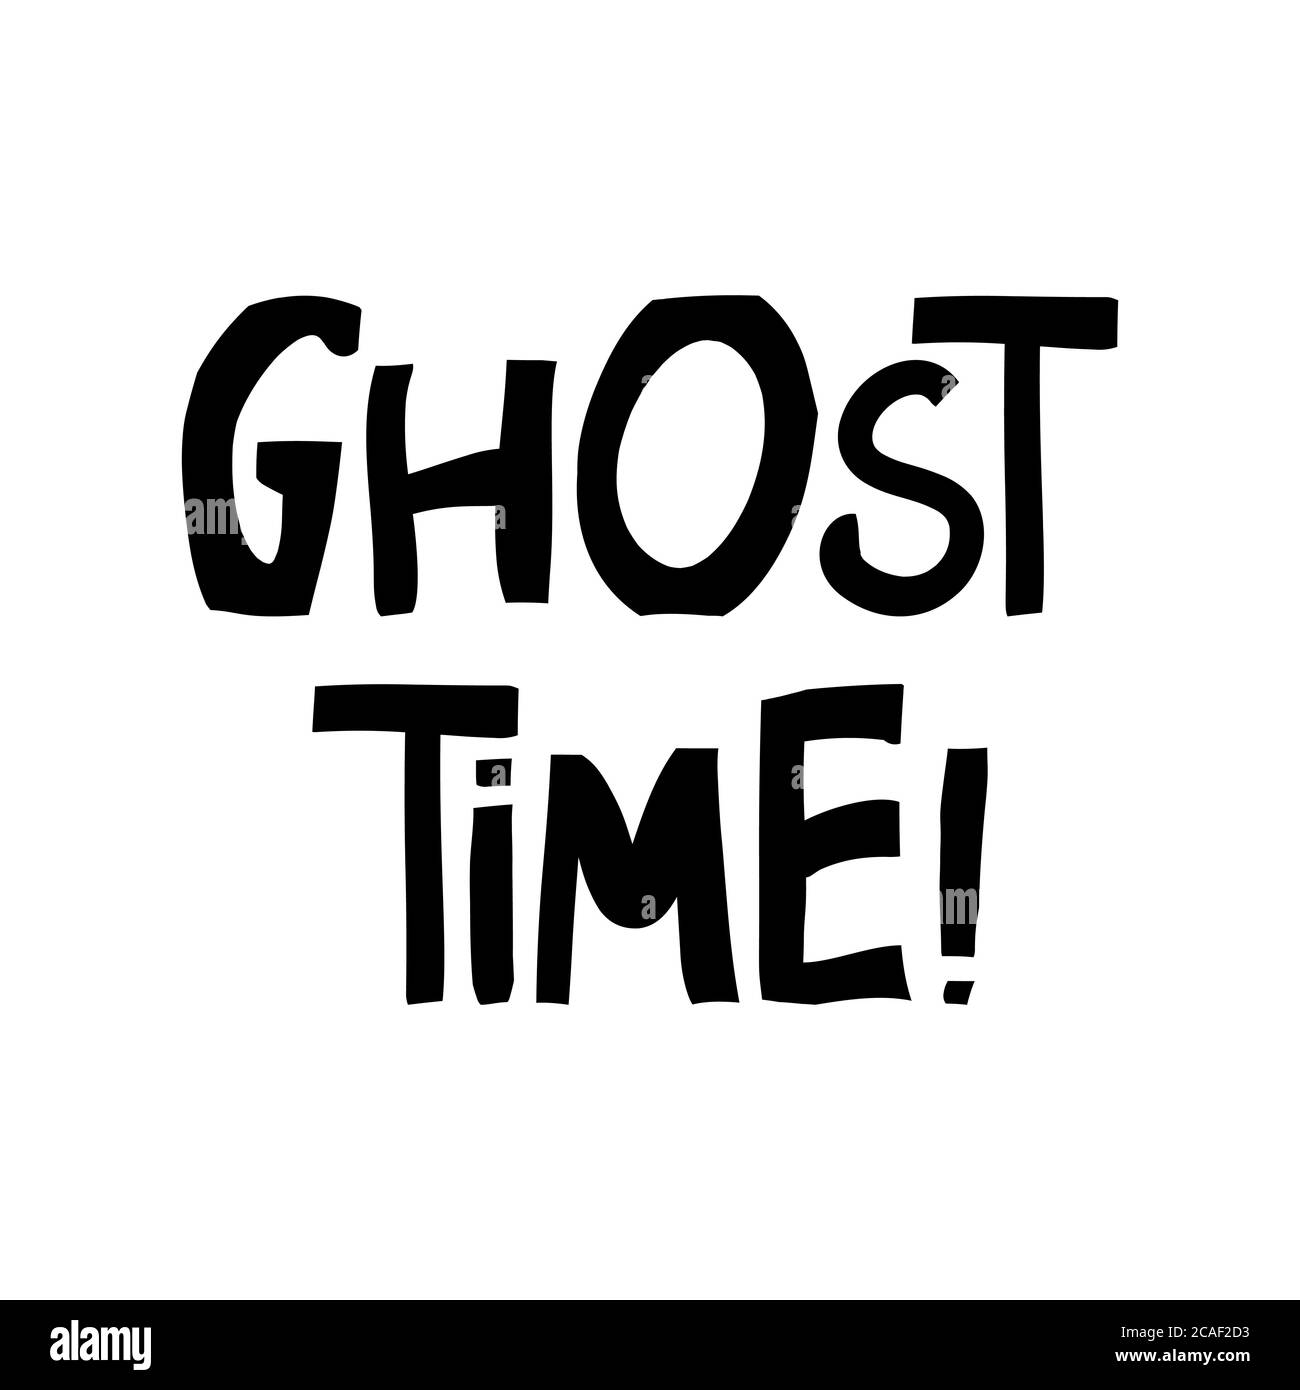 Ghost time. Halloween quote. Cute hand drawn lettering in modern scandinavian style. Isolated on white background. Vector stock illustration. Stock Vector